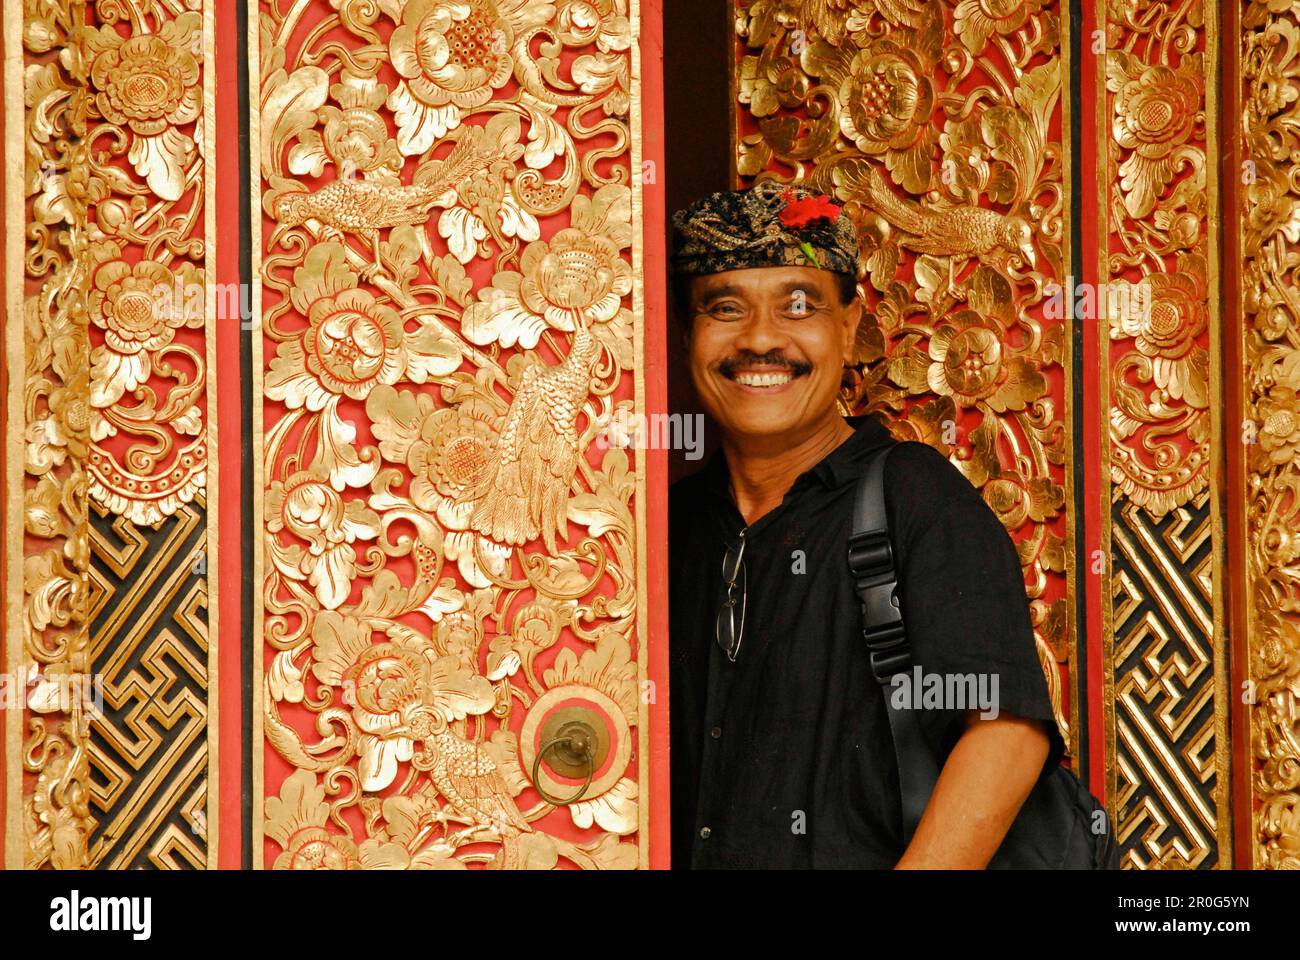 Laughing man at a carved door of his ARMA museum, Ubud, Bali, Indonesia, Asia Stock Photo